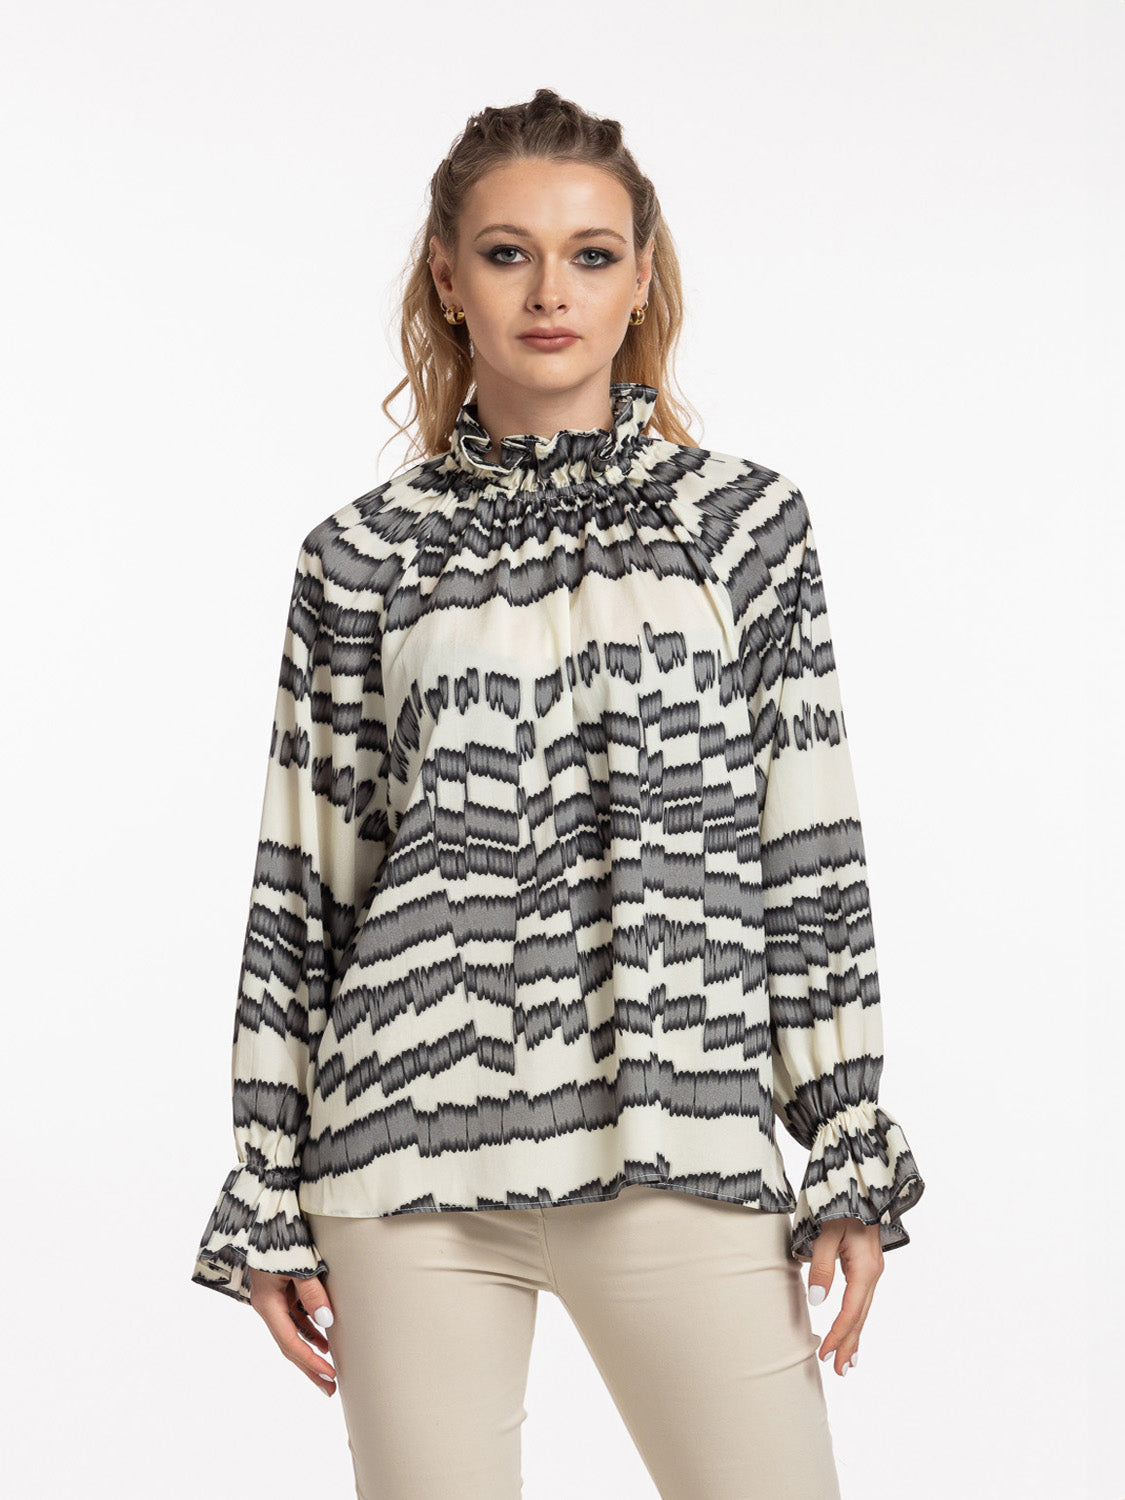 STYLE X LAB ARTIC TOP - PRINT - THE VOGUE STORE